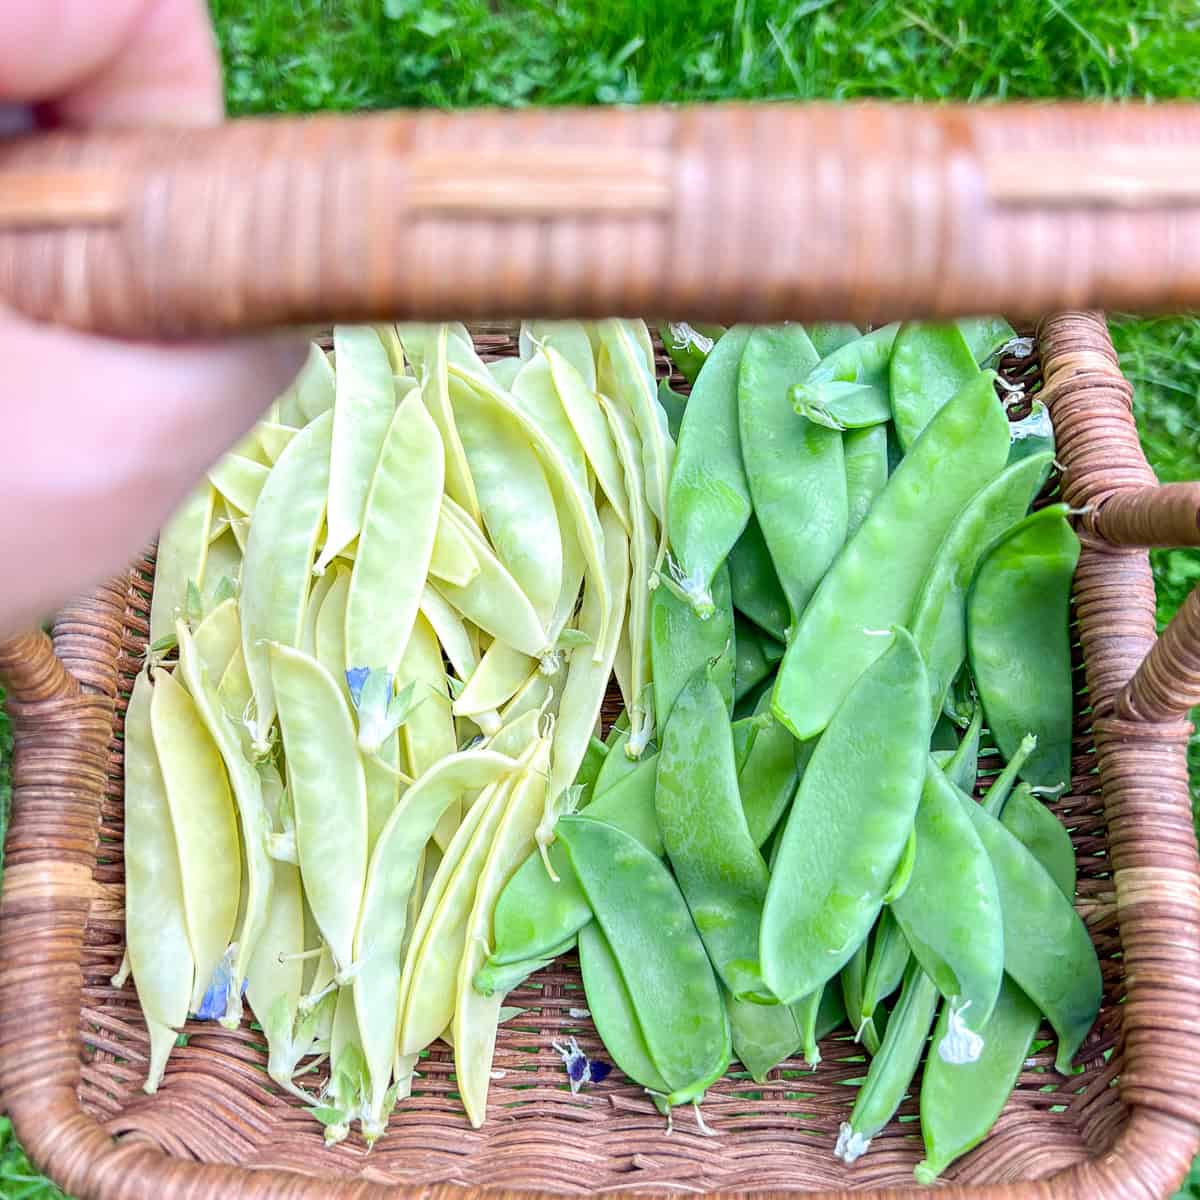 A harvesting basket filled with golden and green snow peas.